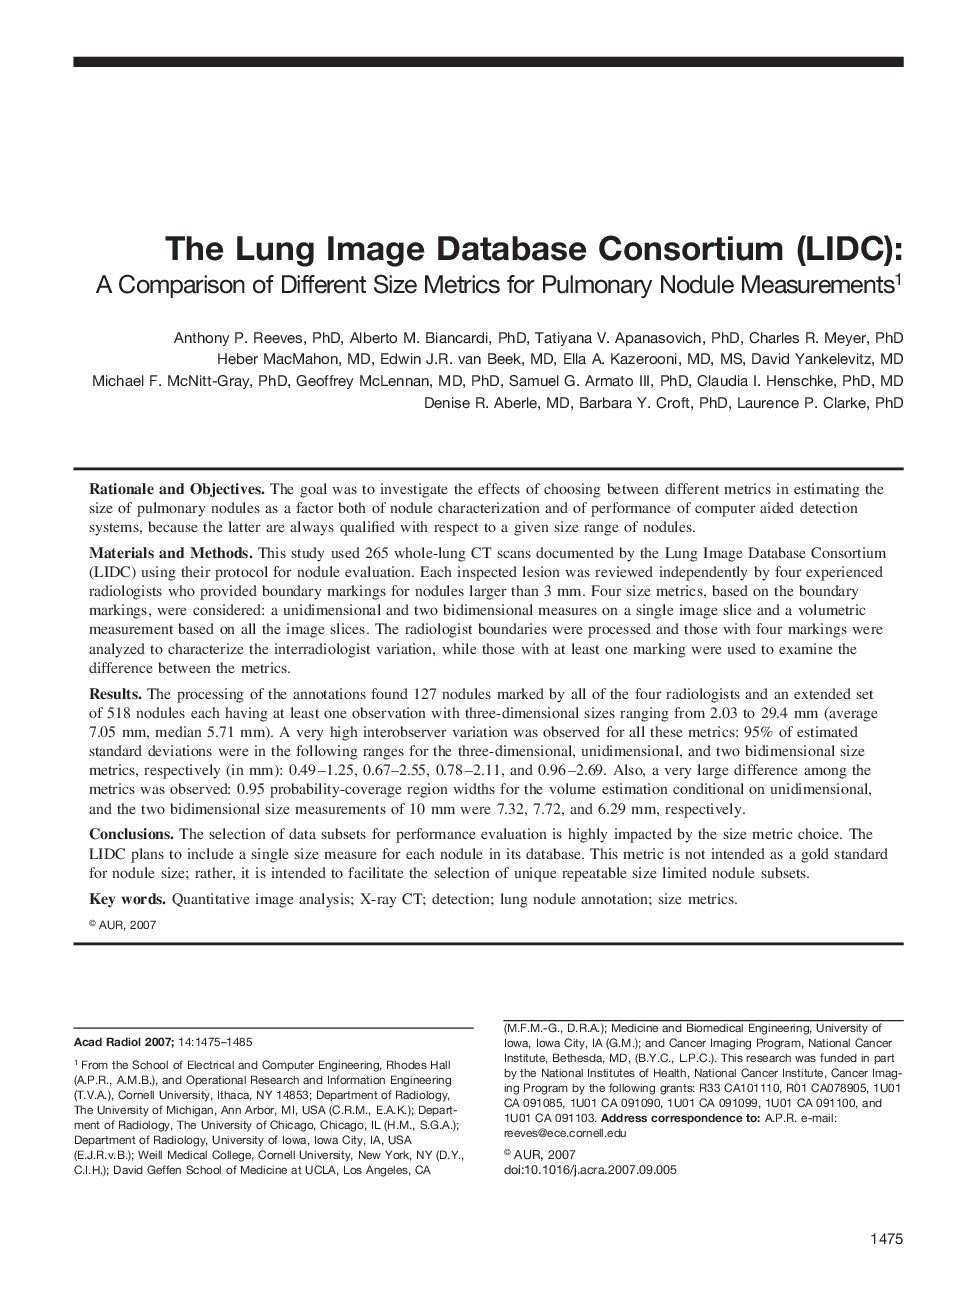 The Lung Image Database Consortium (LIDC)